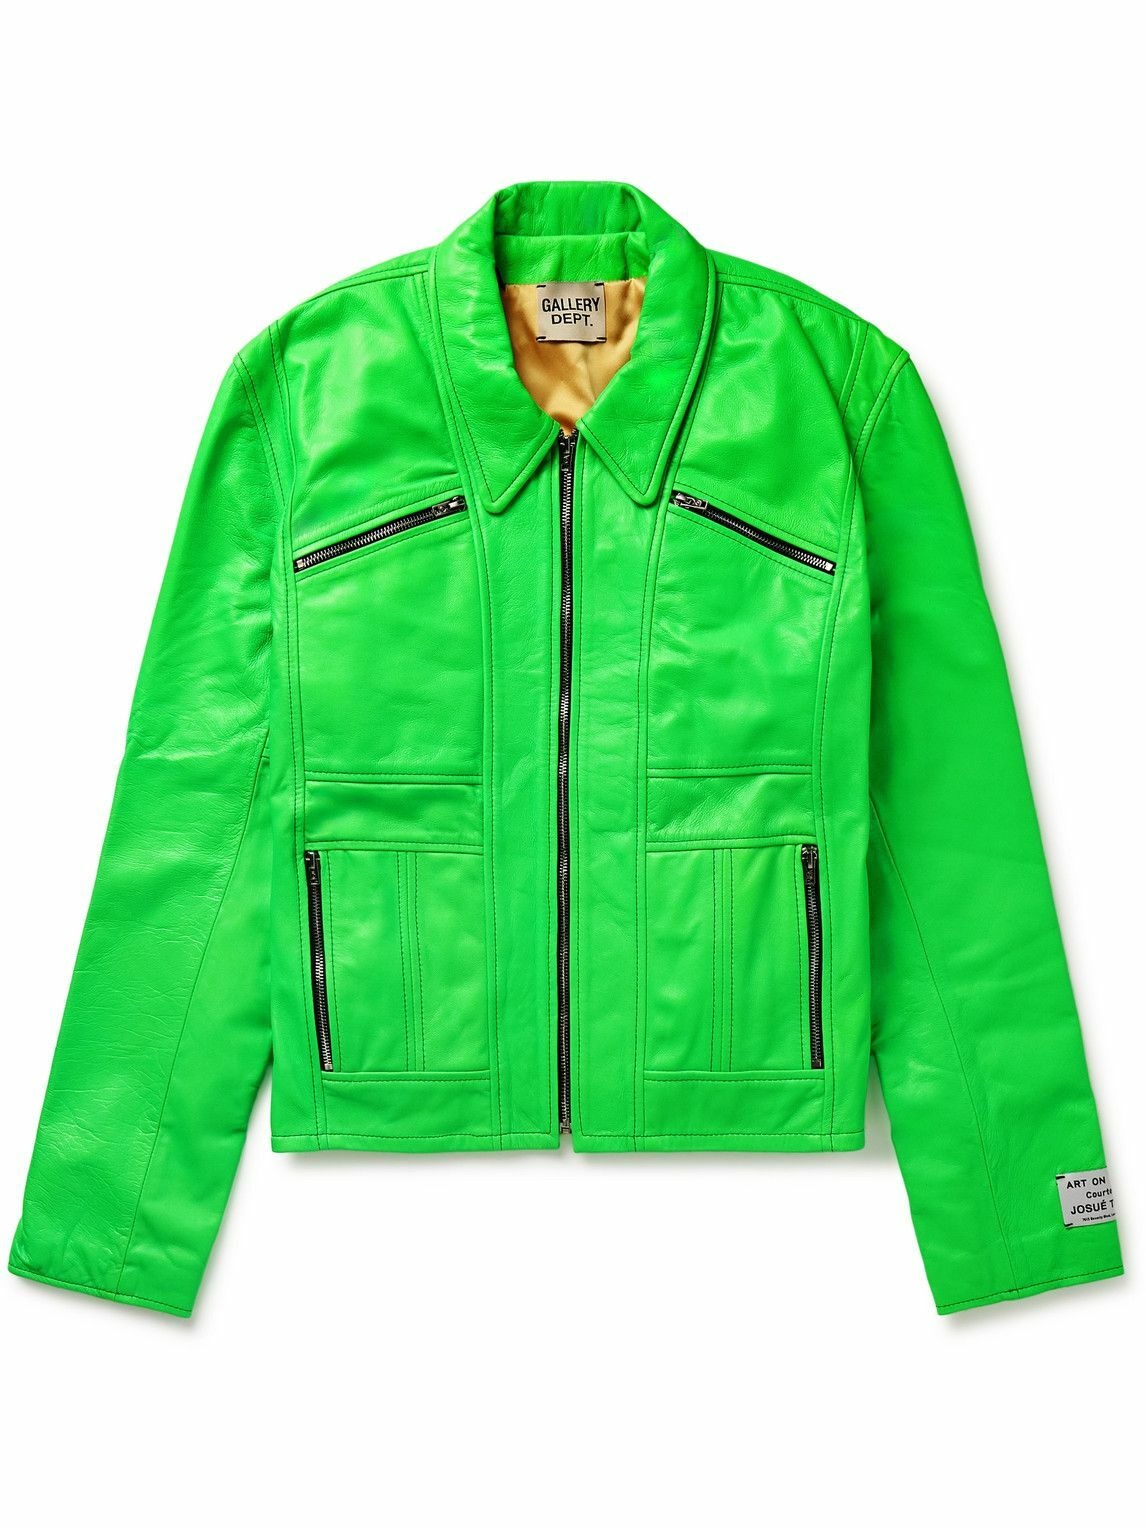 Gallery Dept. - Bowery Slim-Fit Leather Jacket - Green Gallery Dept.